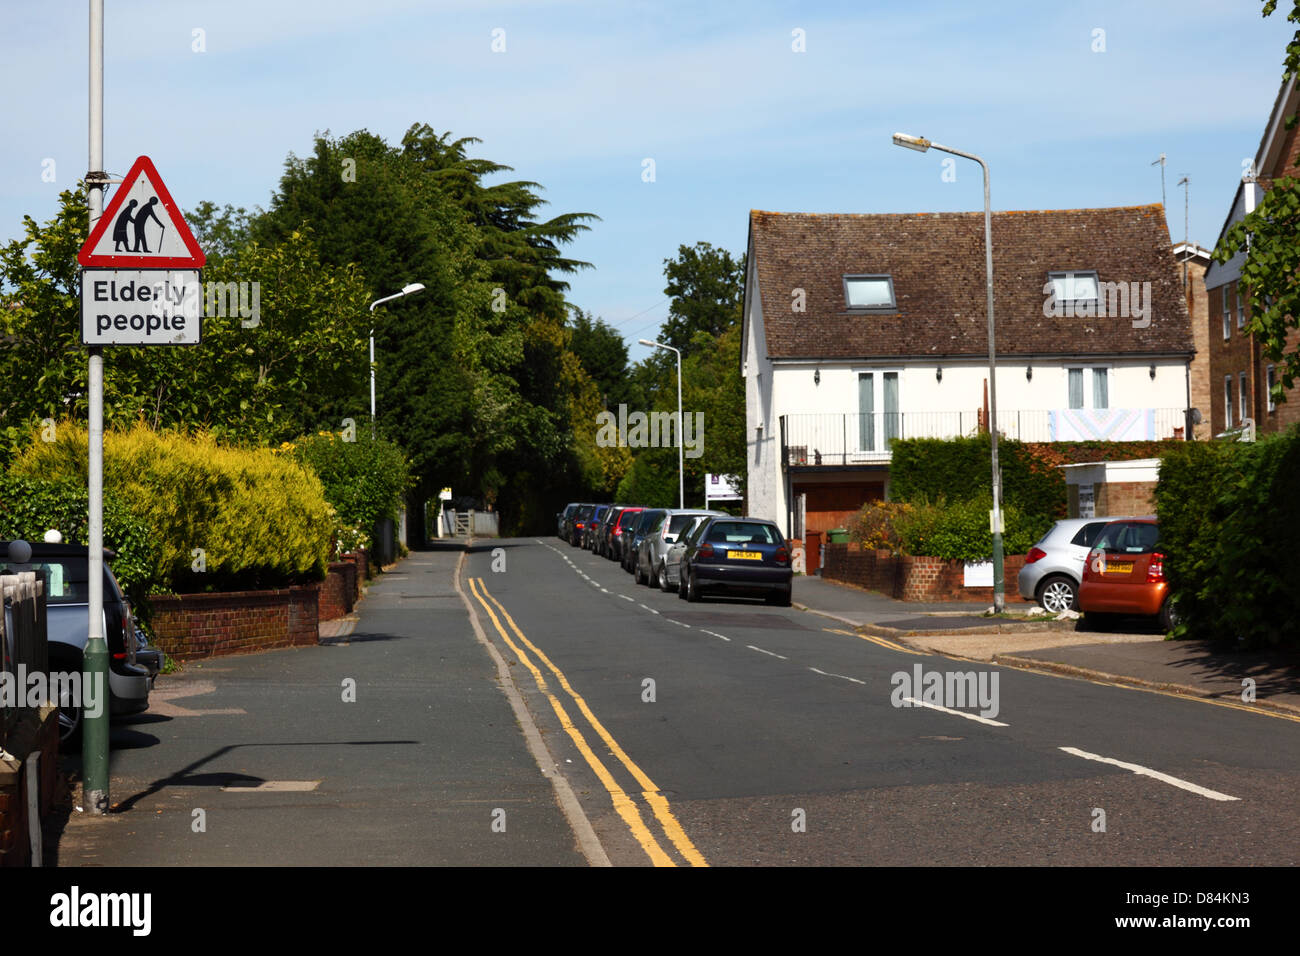 Elderly people crossing road sign in residential area, Southborough , near Tunbridge Wells , Kent , England Stock Photo